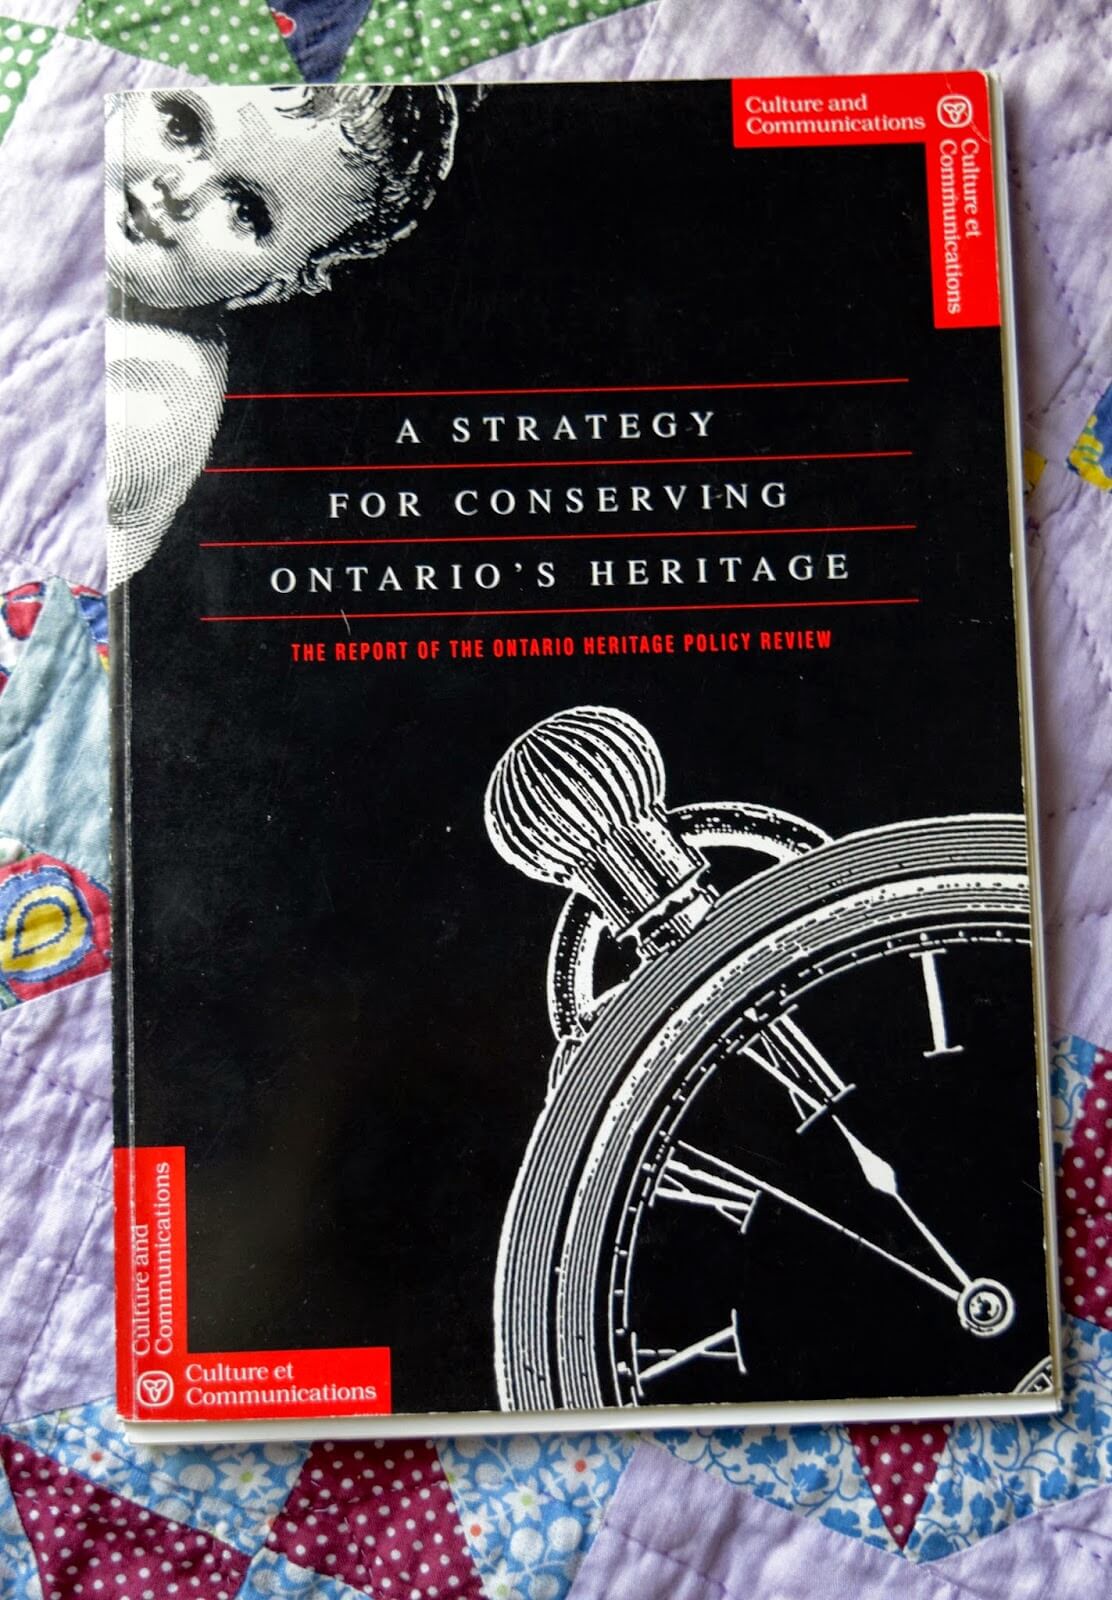 The book cover of A Strategy for Conserving Ontario’s Heritage.